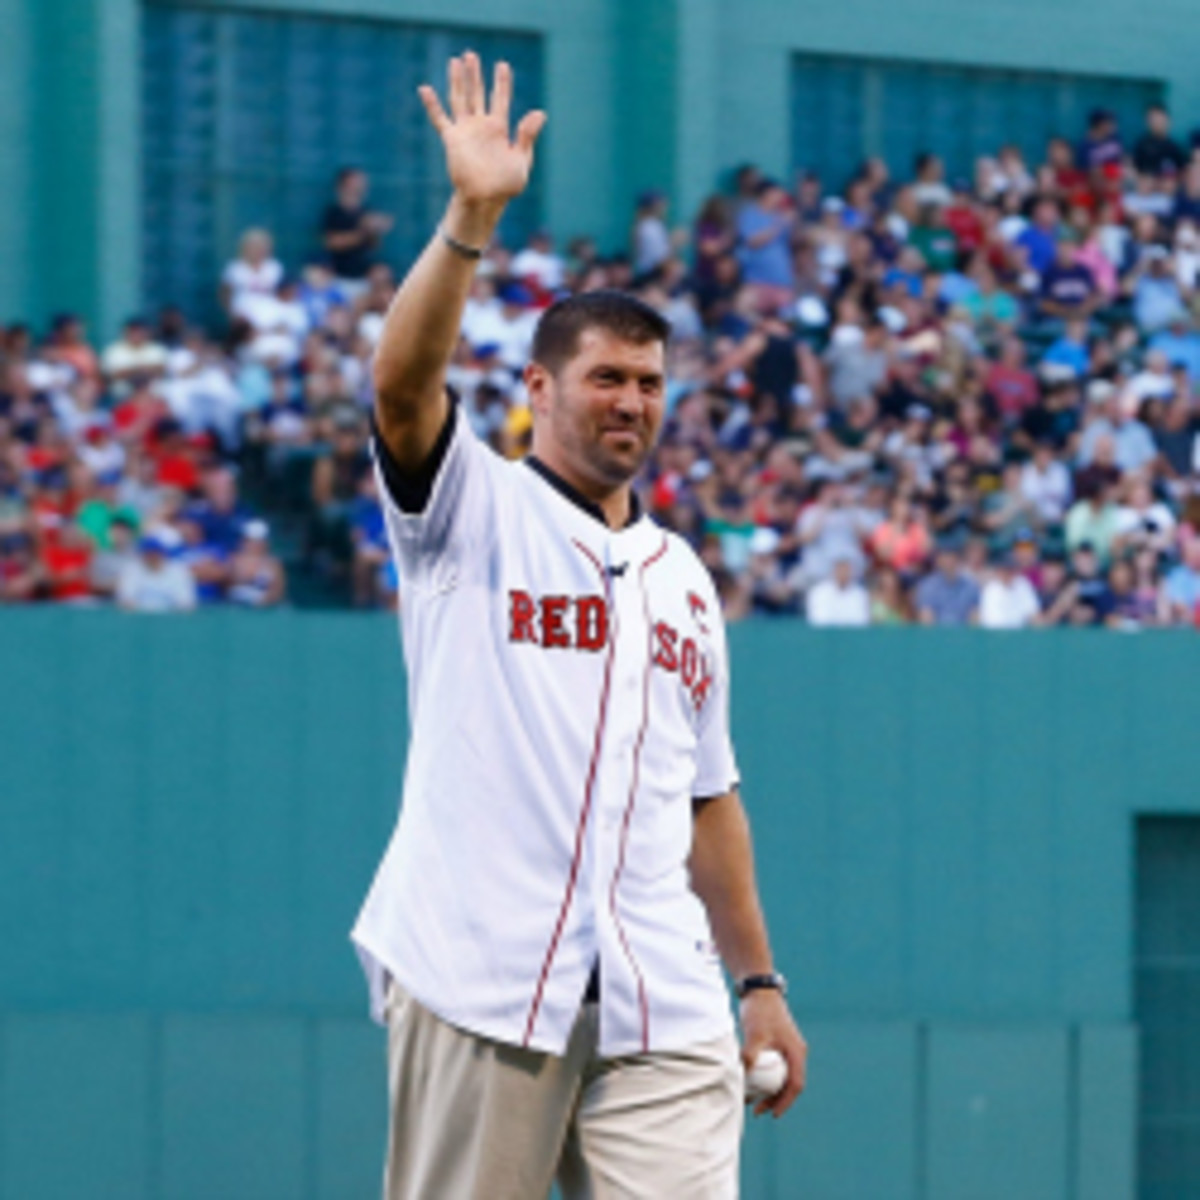 Jason Varitek 'close' to job with Red Sox, likely as special